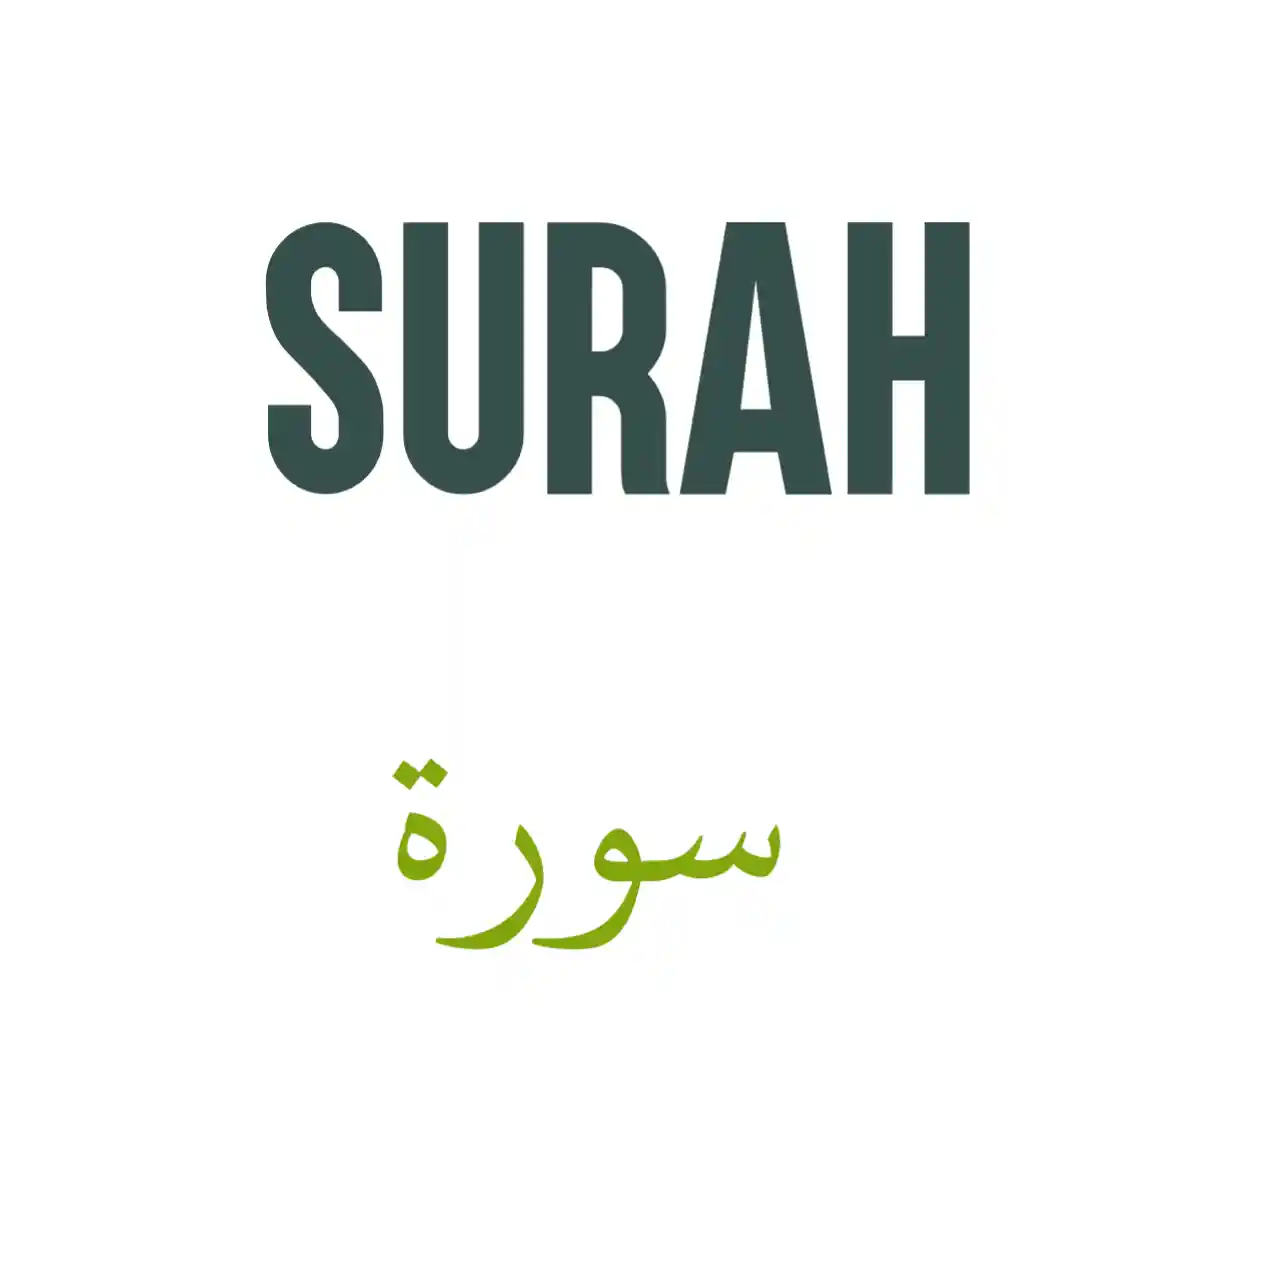 What Is Surah